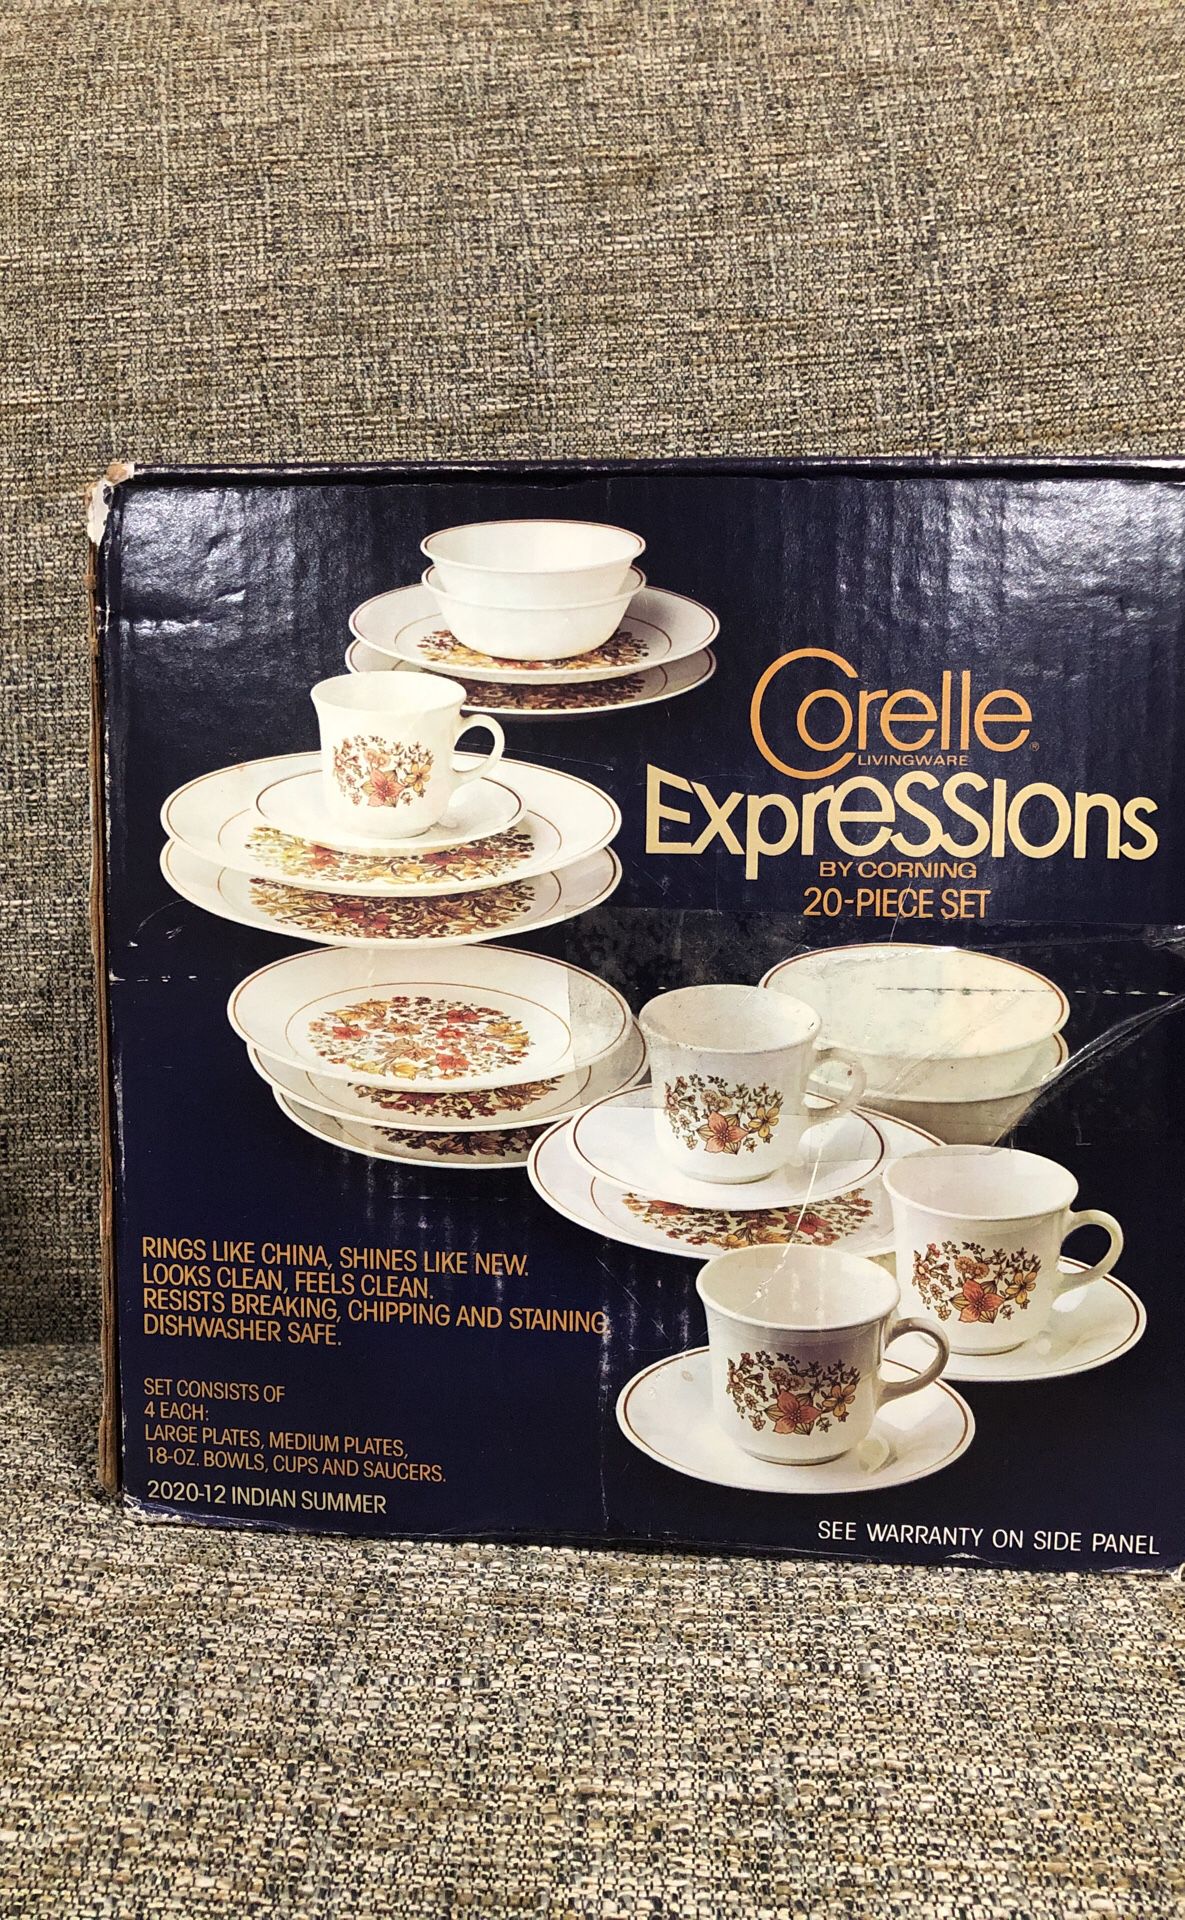 Corelle Livingware Expressions. Please see all the pictures and read the description